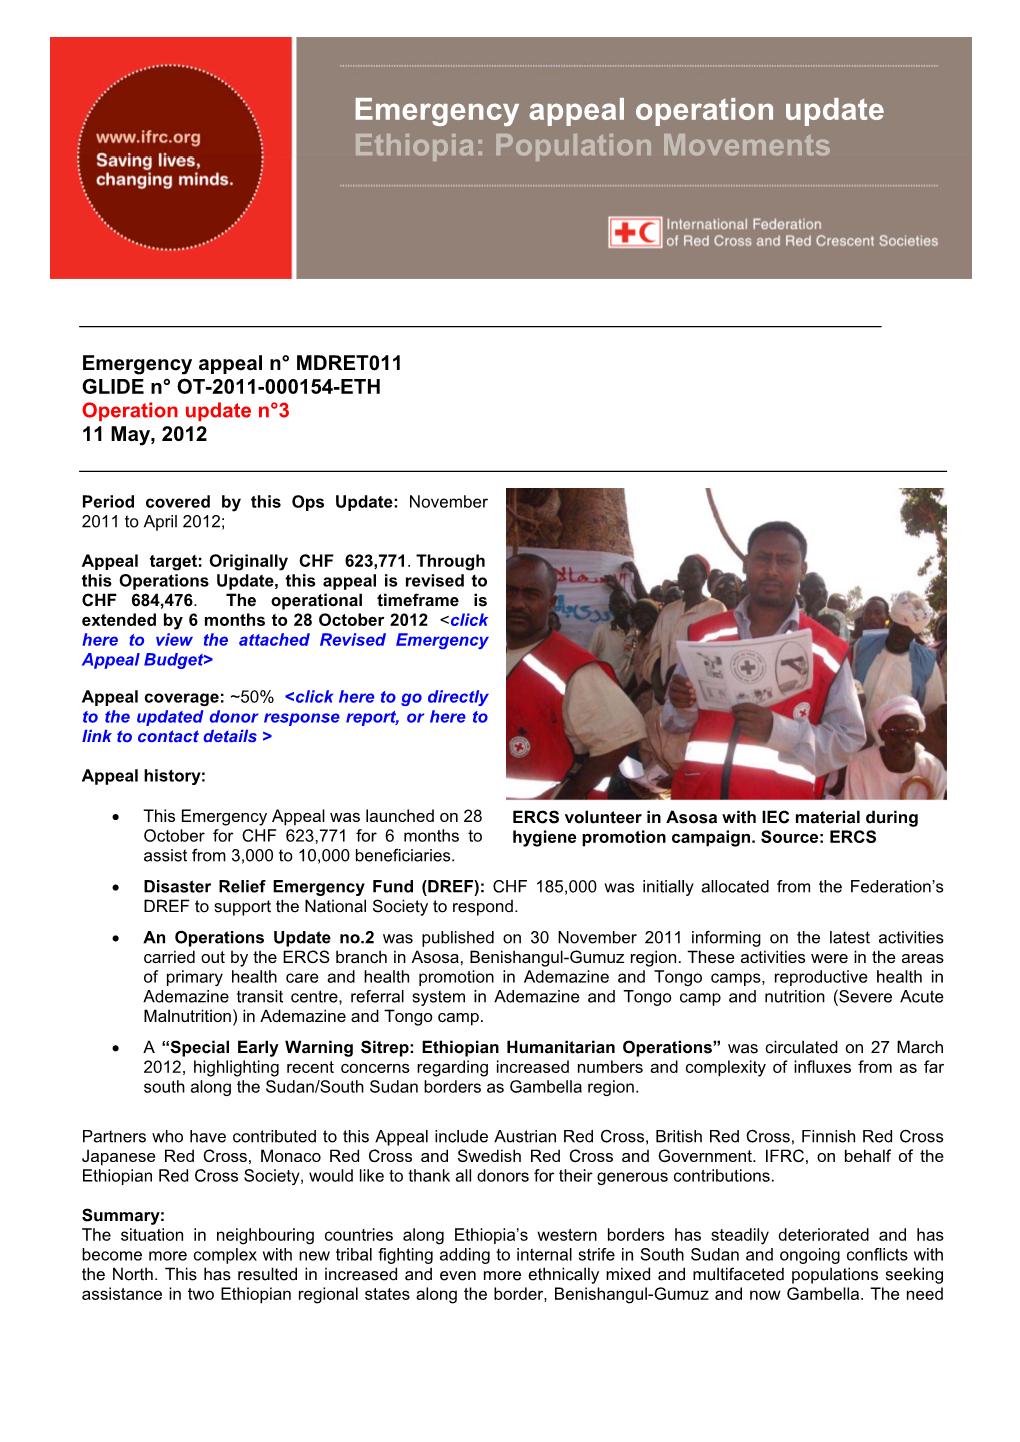 Emergency Appeal Operation Update Ethiopia: Population Movements